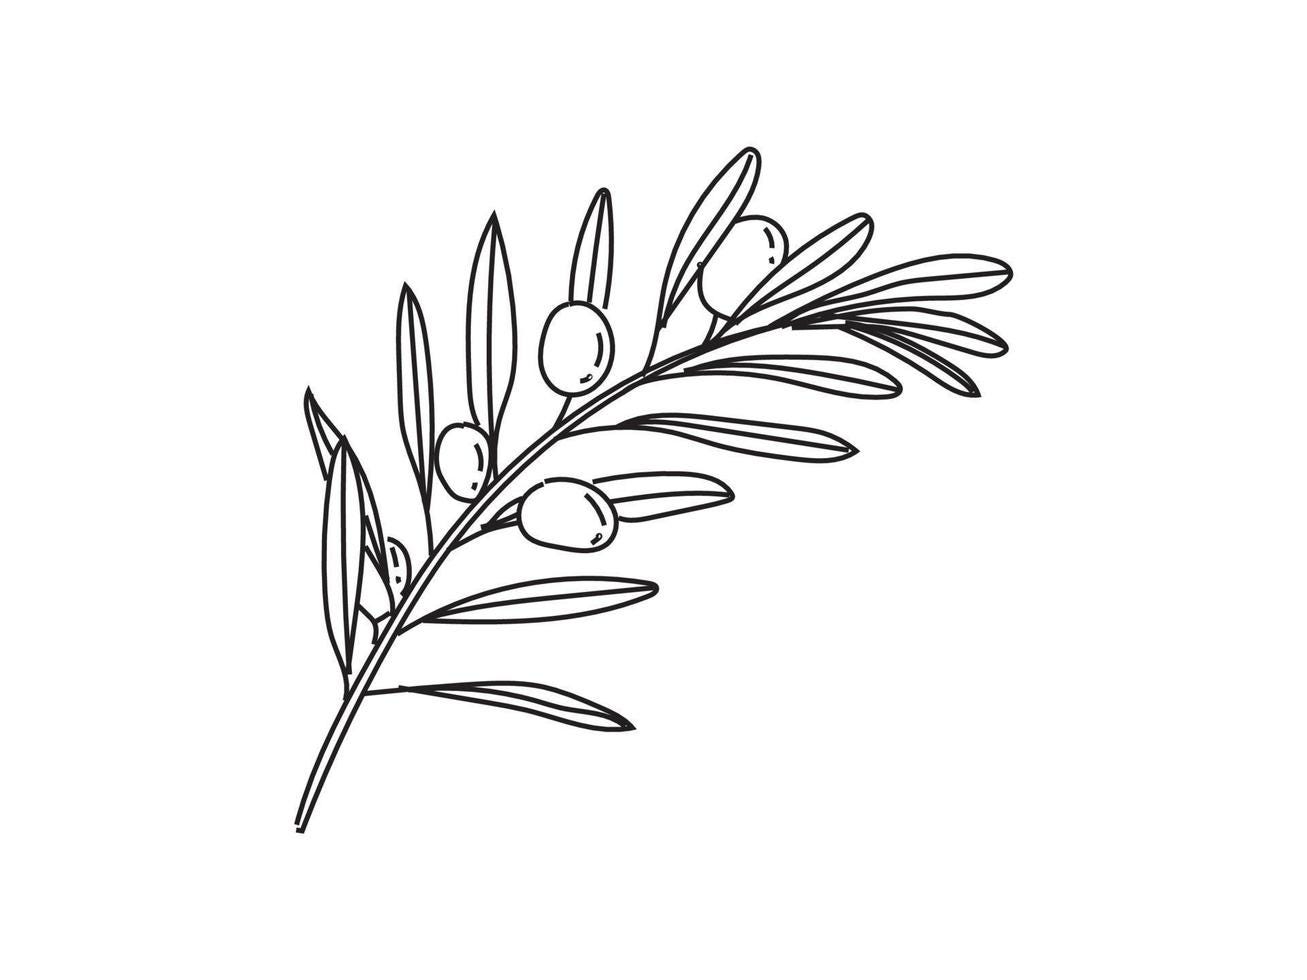 A drawing of an olive branch